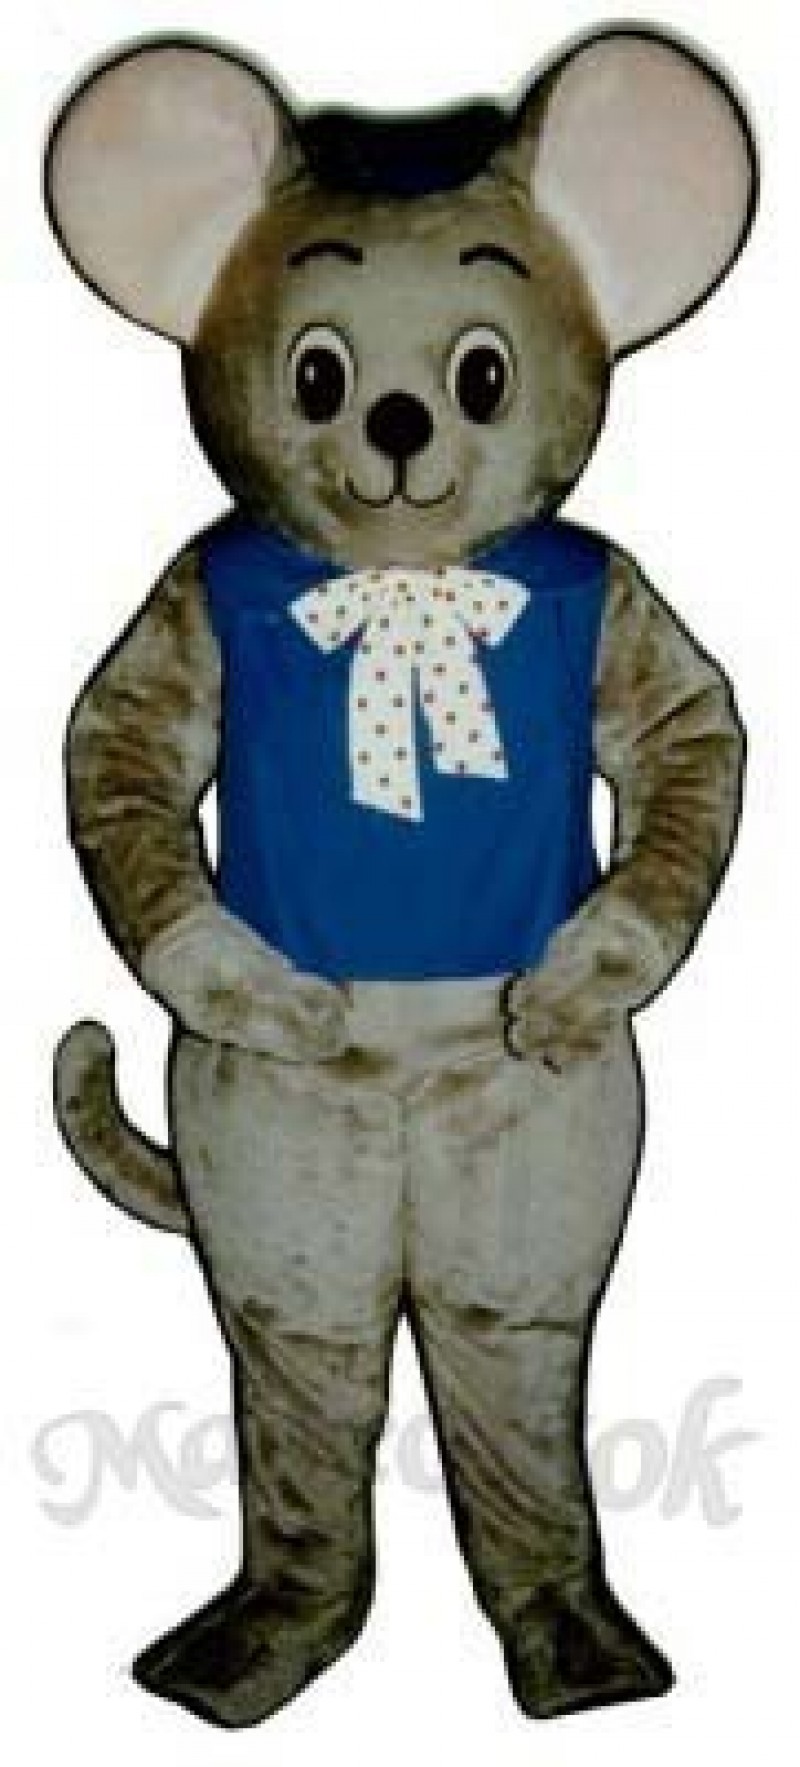 Maxi Mouse with Vest & Hat Mascot Costume